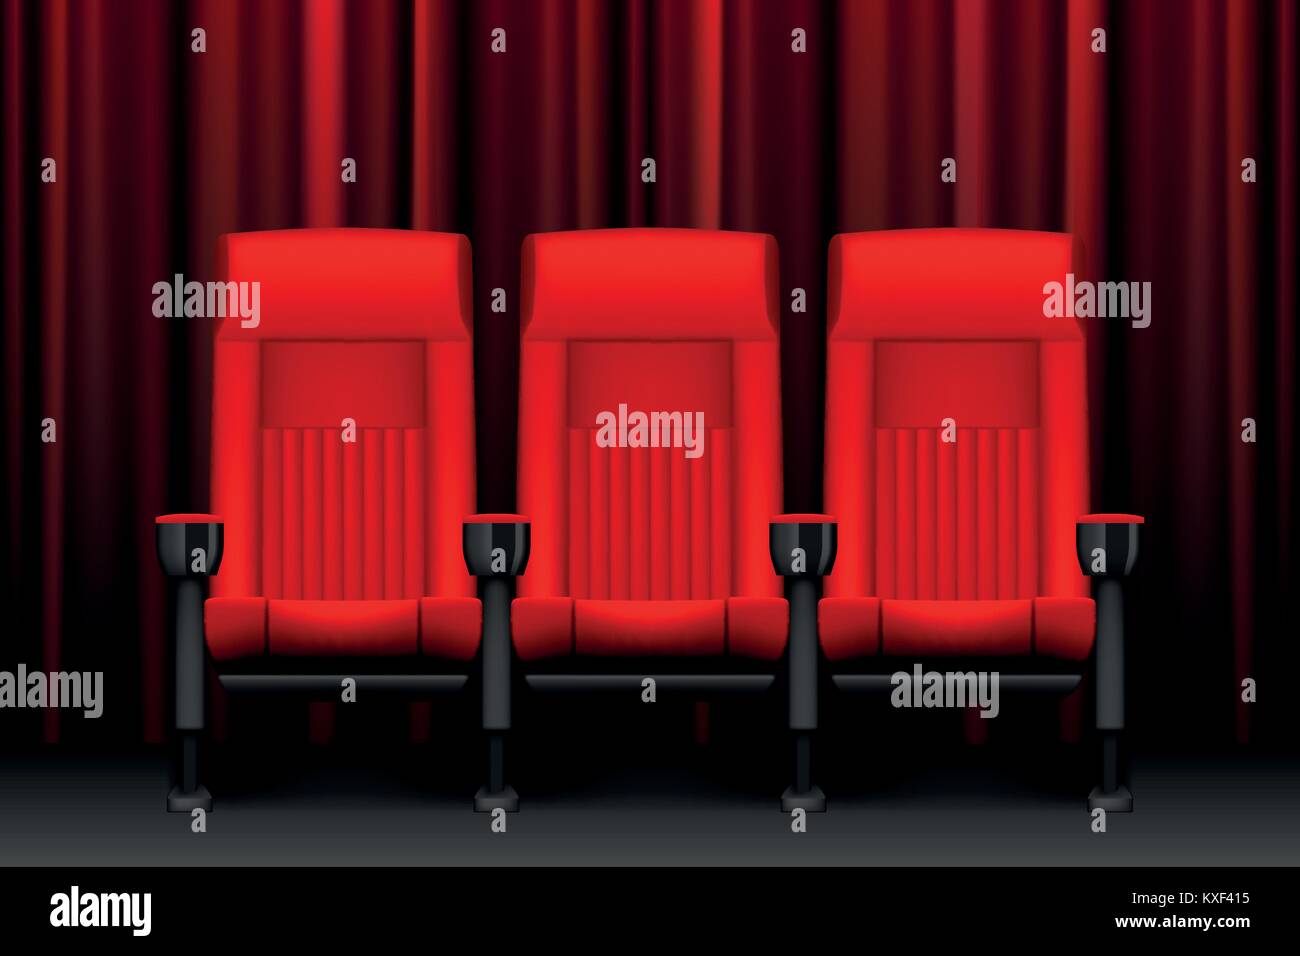 Cinema show design with red empty seats. Poster for concert, party, theater. Realistic chairs for cinema theater. vector illustration Stock Vector